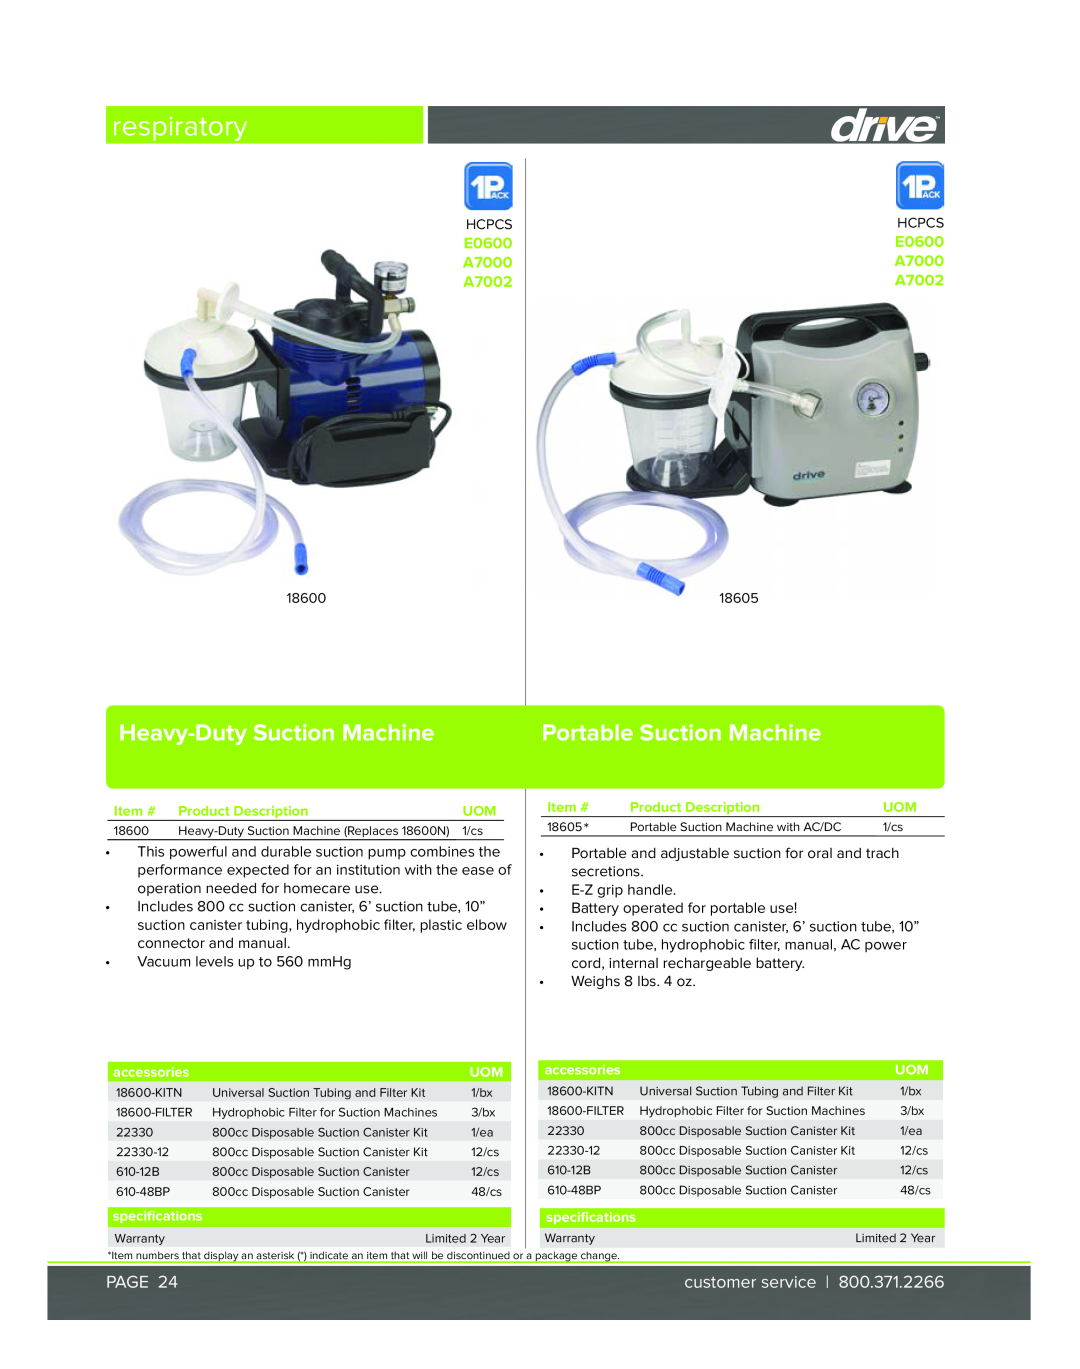 Drive Medical Design A7000, E0600 specifications respiratory, Heavy-Duty Suction Machine, Portable Suction Machine, Page 